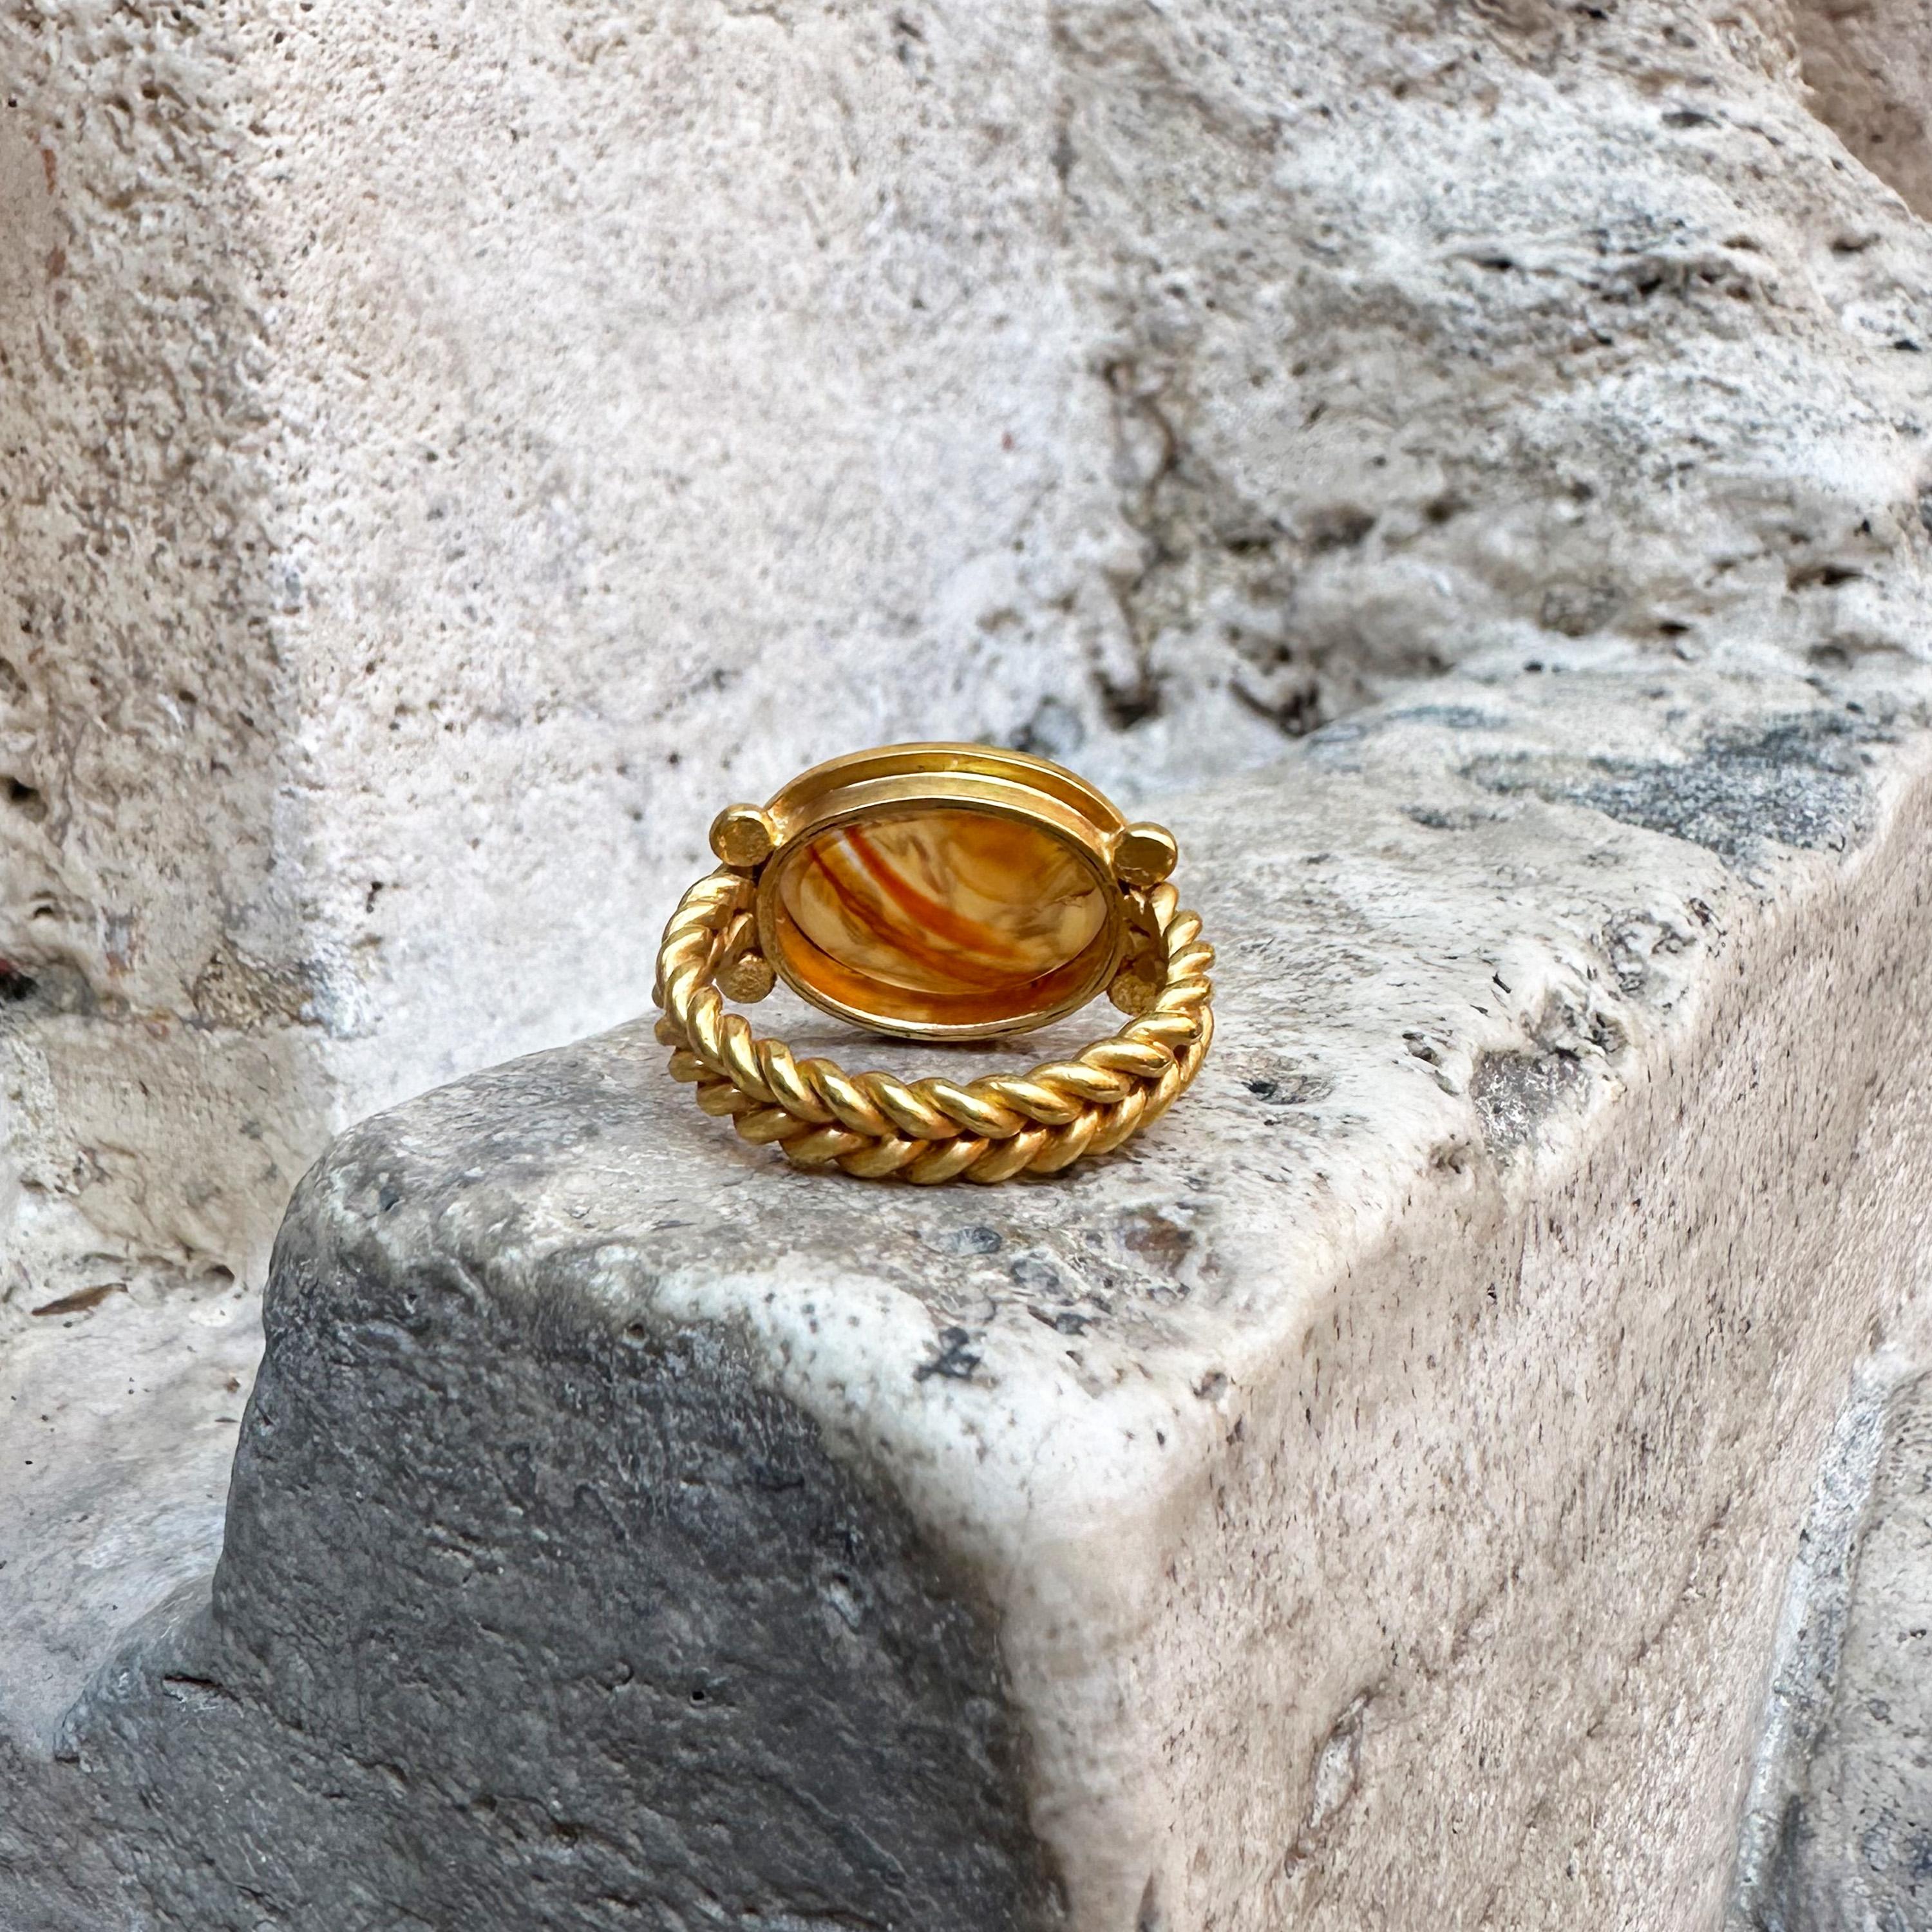 In this 18 kt gold ring, handmade by our goldsmiths, an authentic Roman carnelian intaglio depicting a winged Eros/Cupid standing on a a chariot pulled by two roosters.

Eros, the god of Love, known as Cupid by the Romans, has always been depicted,